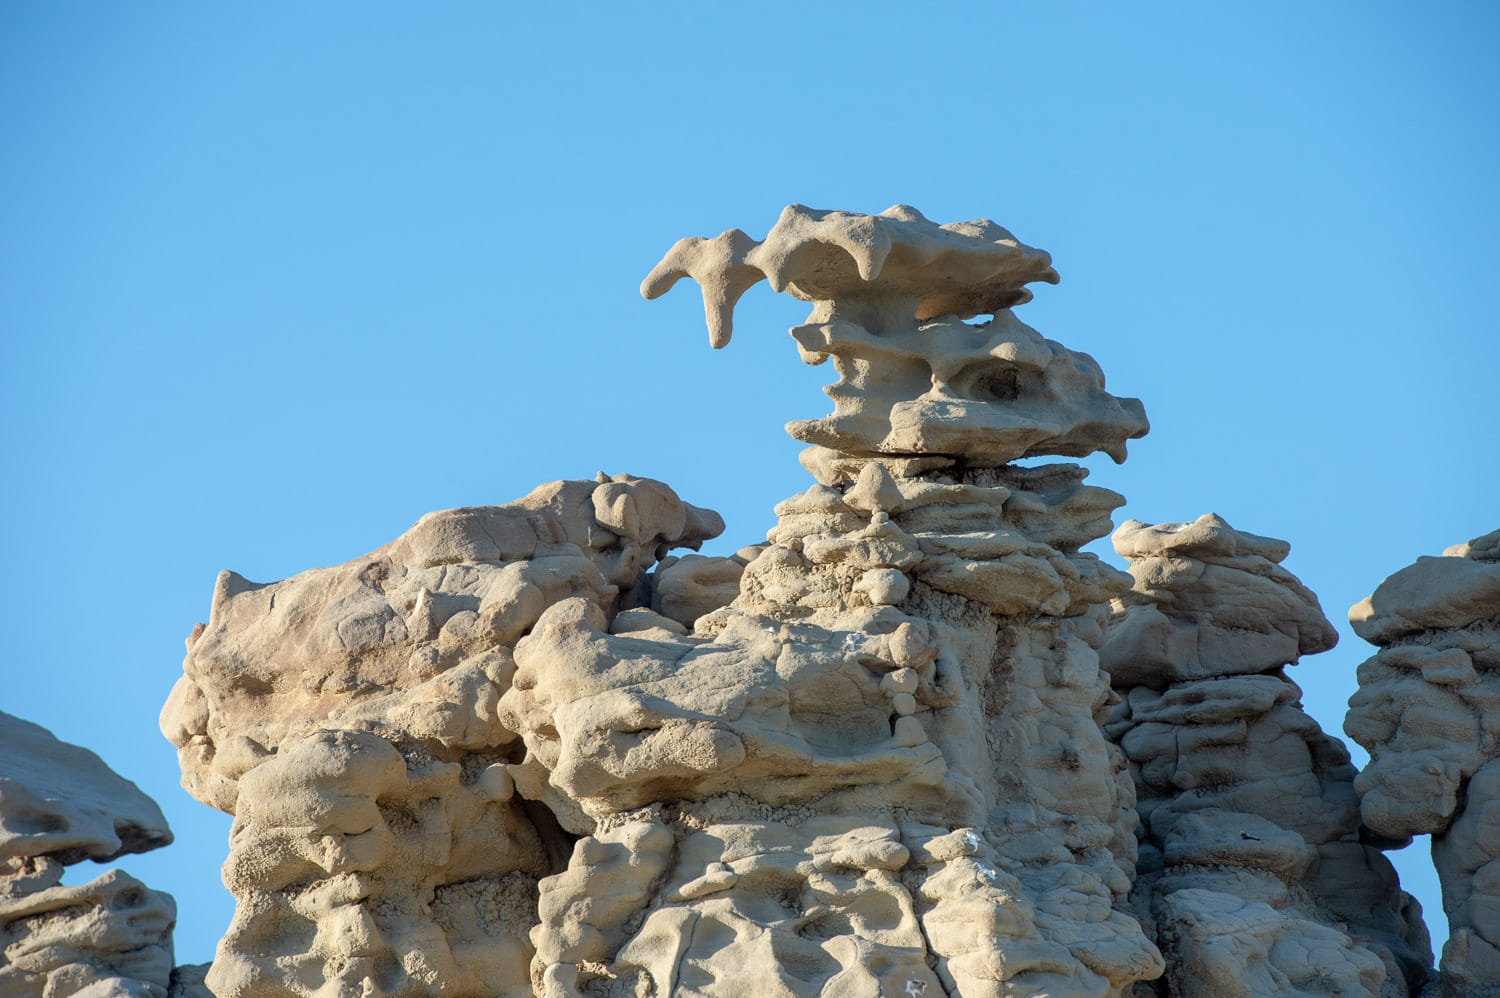 Fanciful figure naturally sculpted in the sandstone of Fantasy Canyon, south of Vernal, Utah.